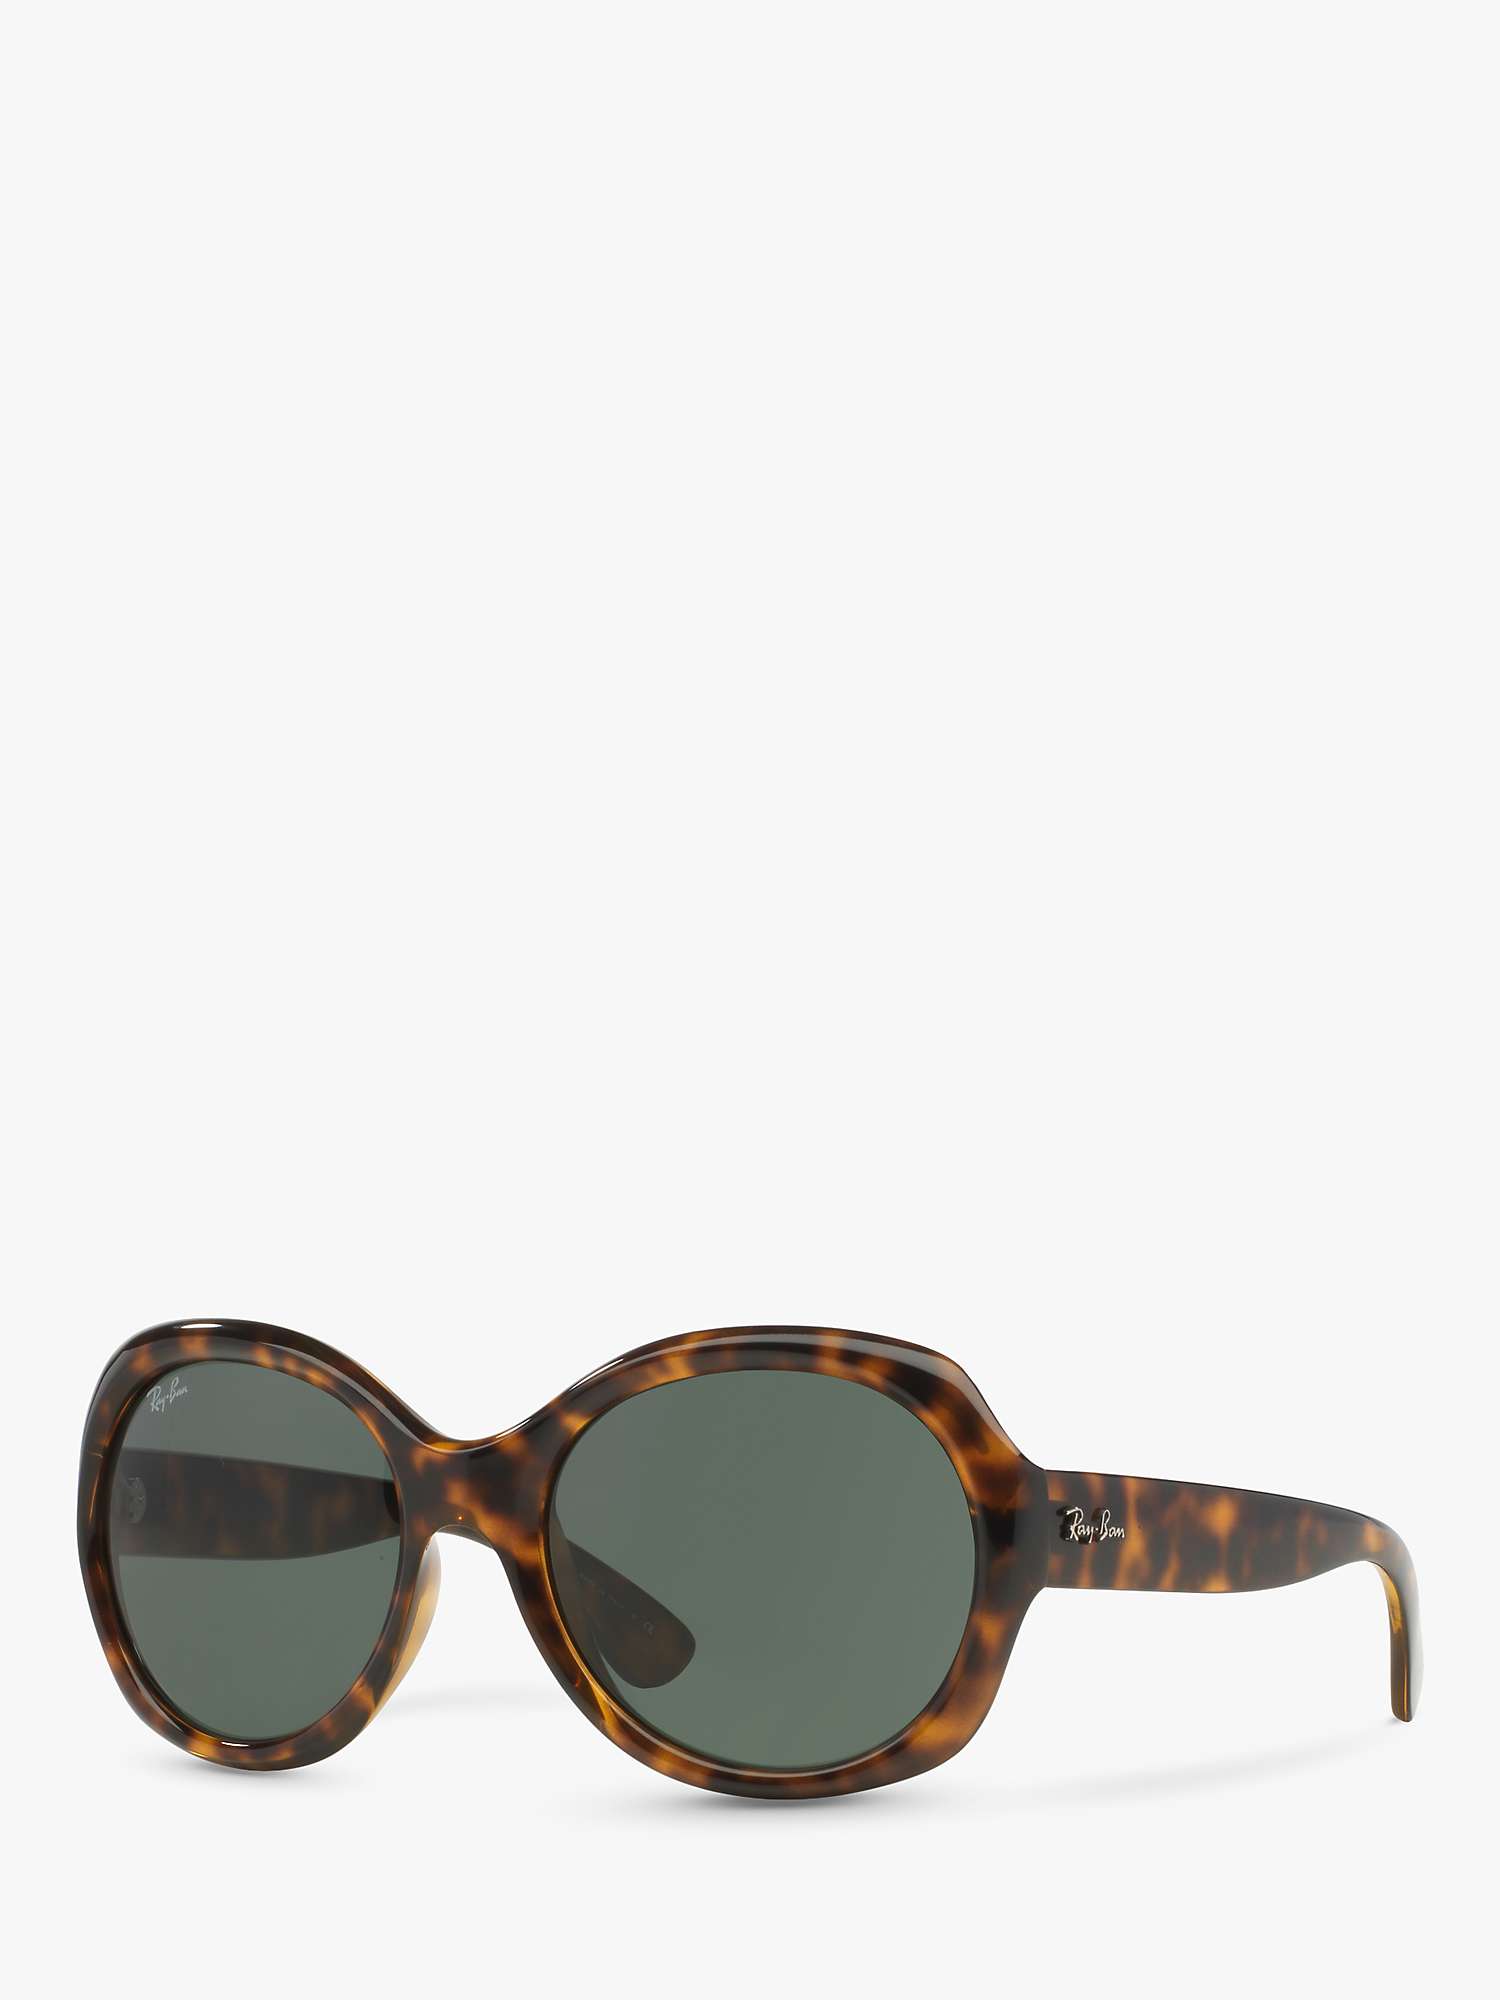 Buy Ray-Ban RB4191 Highstreet Round Sunglasses Online at johnlewis.com